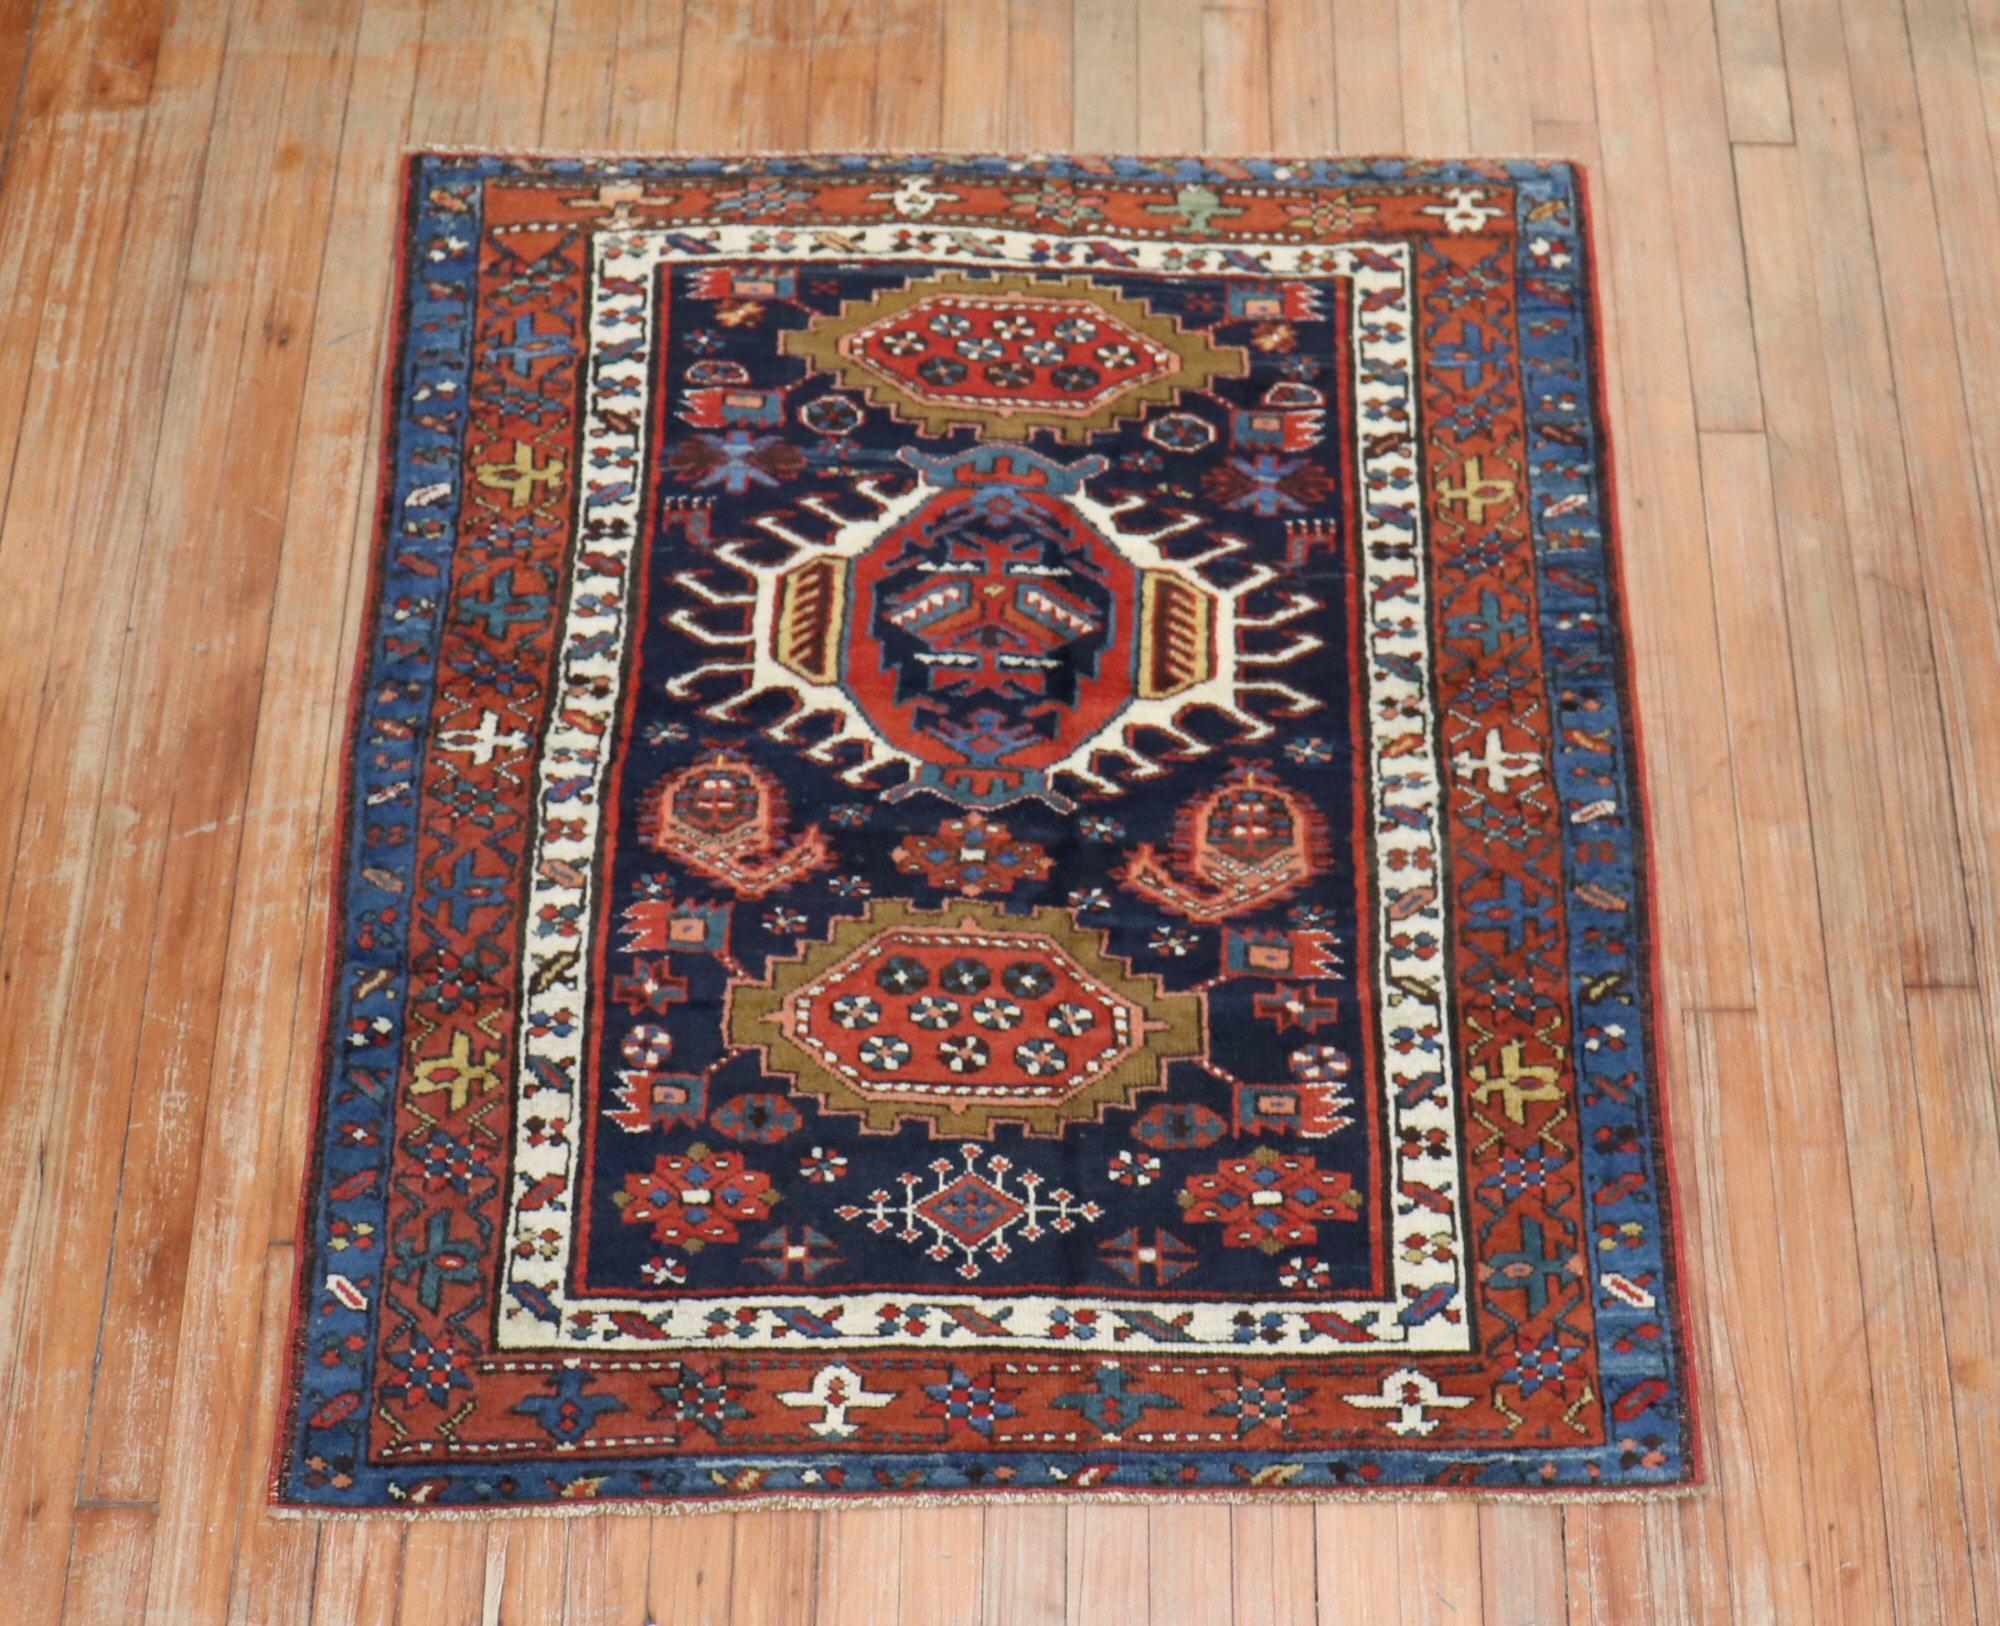 An early 20th century traditional navy blue and brown square size Persian Heriz carpet.

Measures: 3'4